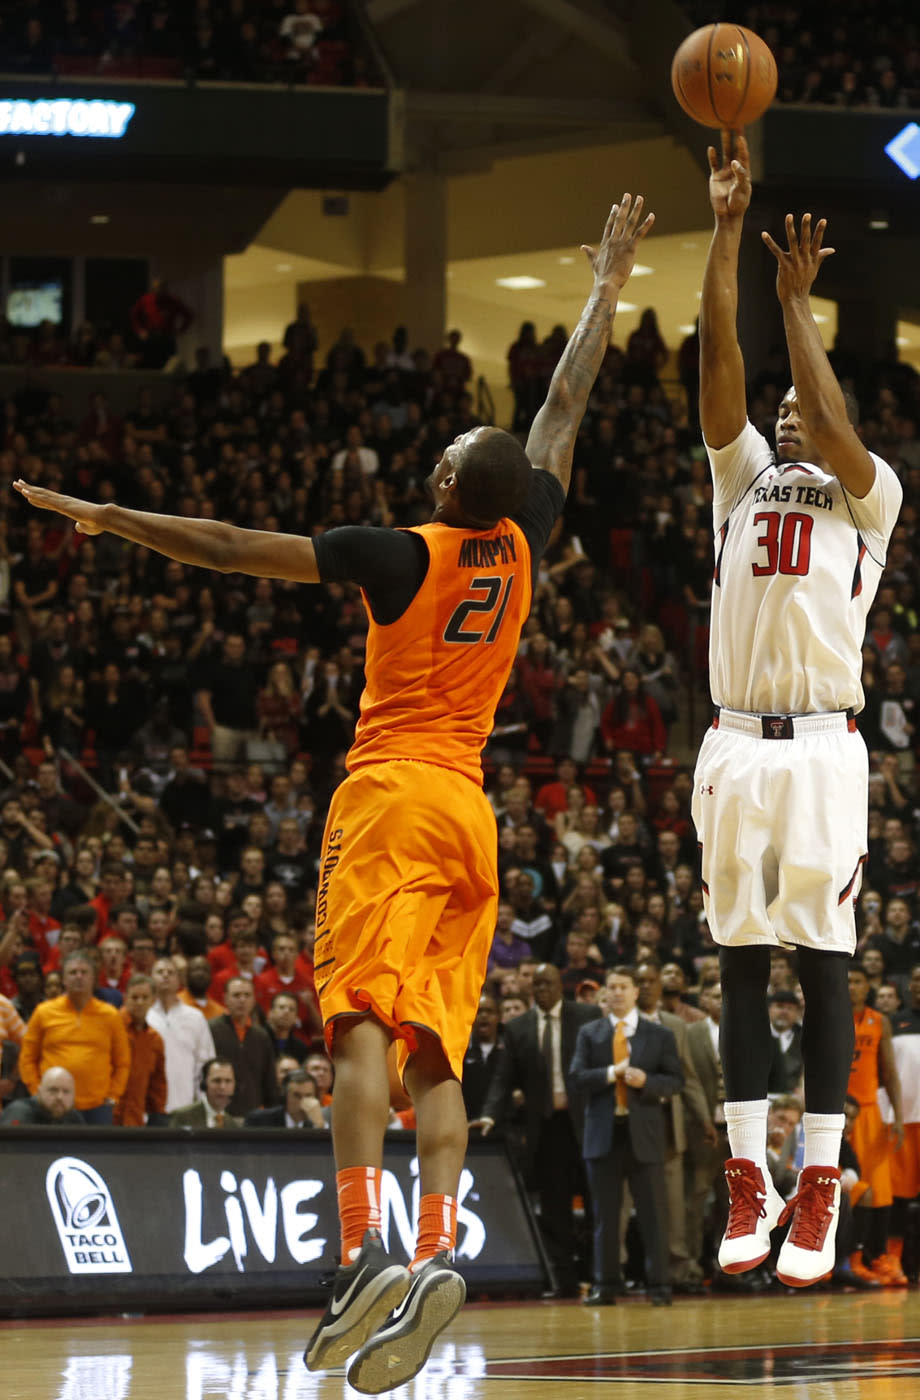 Texas Tech's Jaye Crockett(30) shoots over Oklahoma State's Kamari Murphy(21) during their NCAA college basketball game in Lubbock, Texas, Saturday, Feb, 8, 2014. (AP Photo/Lubbock Avalanche-Journal, Tori Eichberger) ALL LOCAL TV OUT